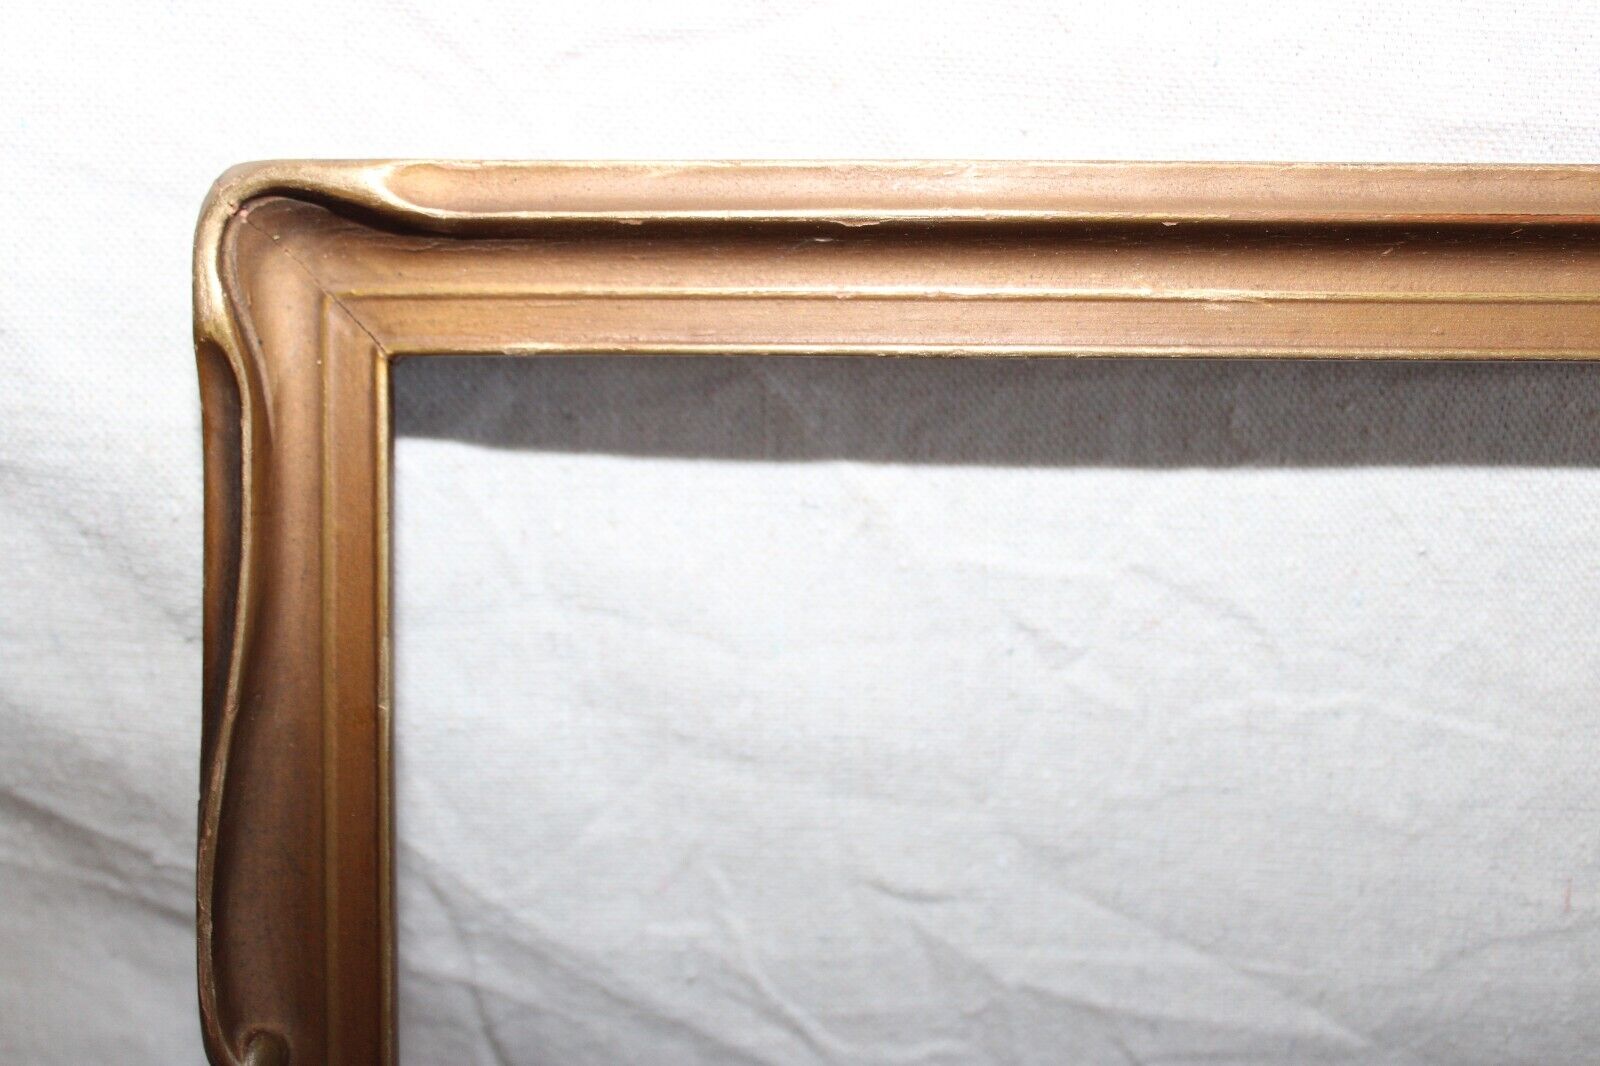 ANTIQUE FITS 8 X 10 PIE CRUST PICTURE FRAME BATWING ARTS AND CRAFTS GOLD